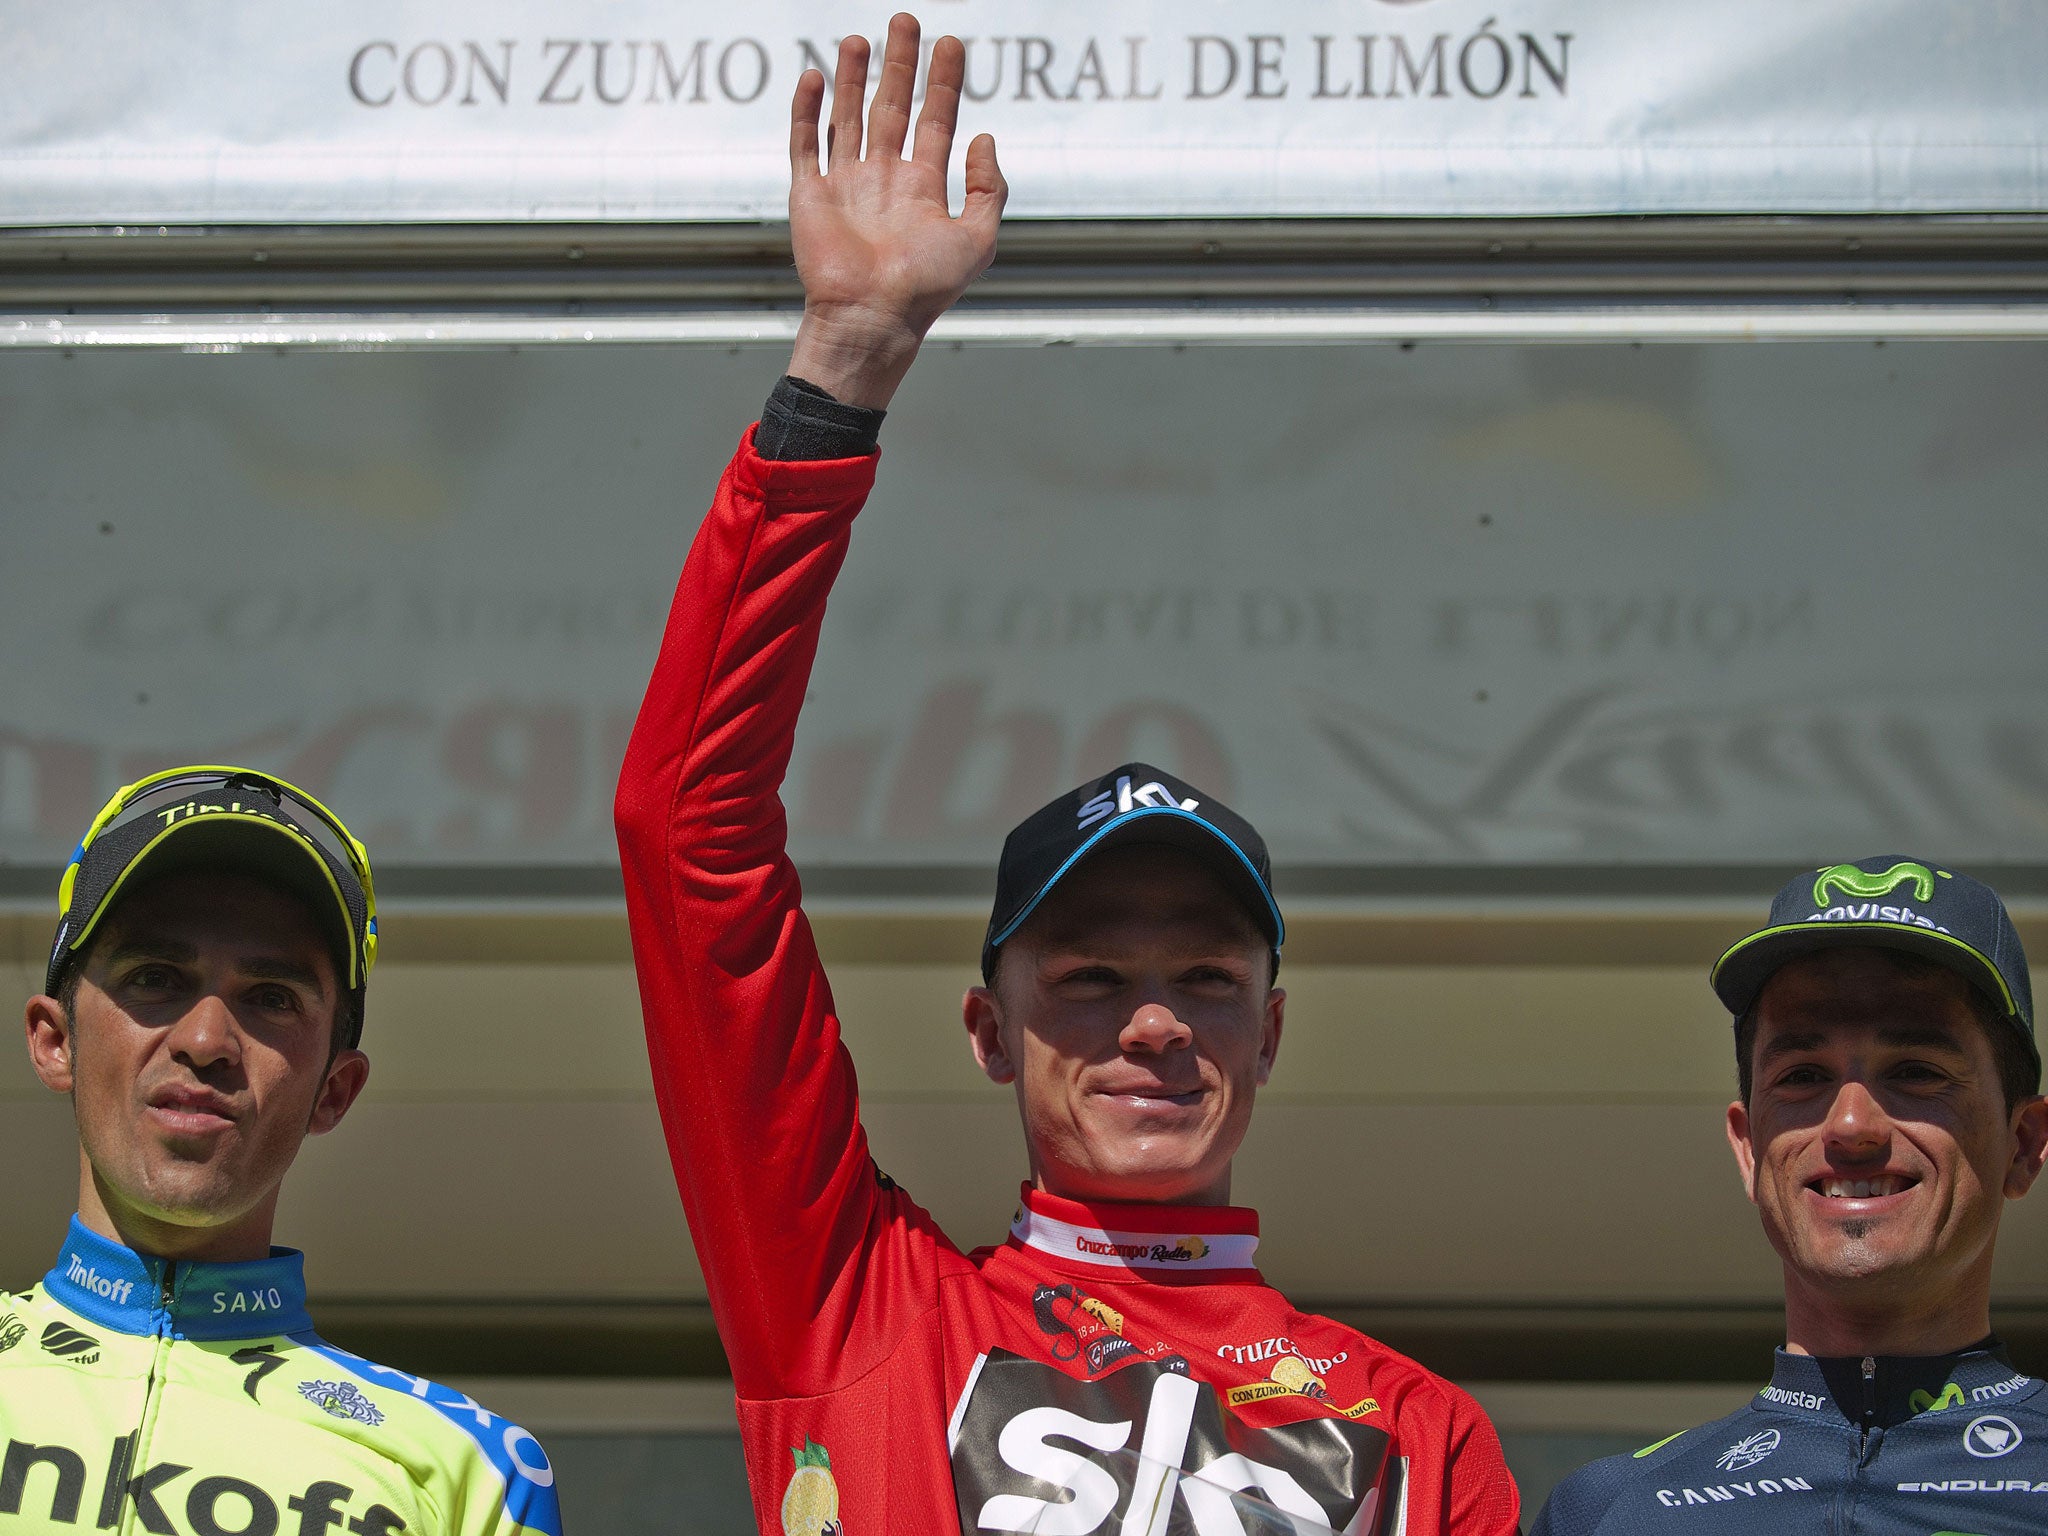 Chris Froome has displayed his early-season form by winning the Vuelta a Andalucia stage race